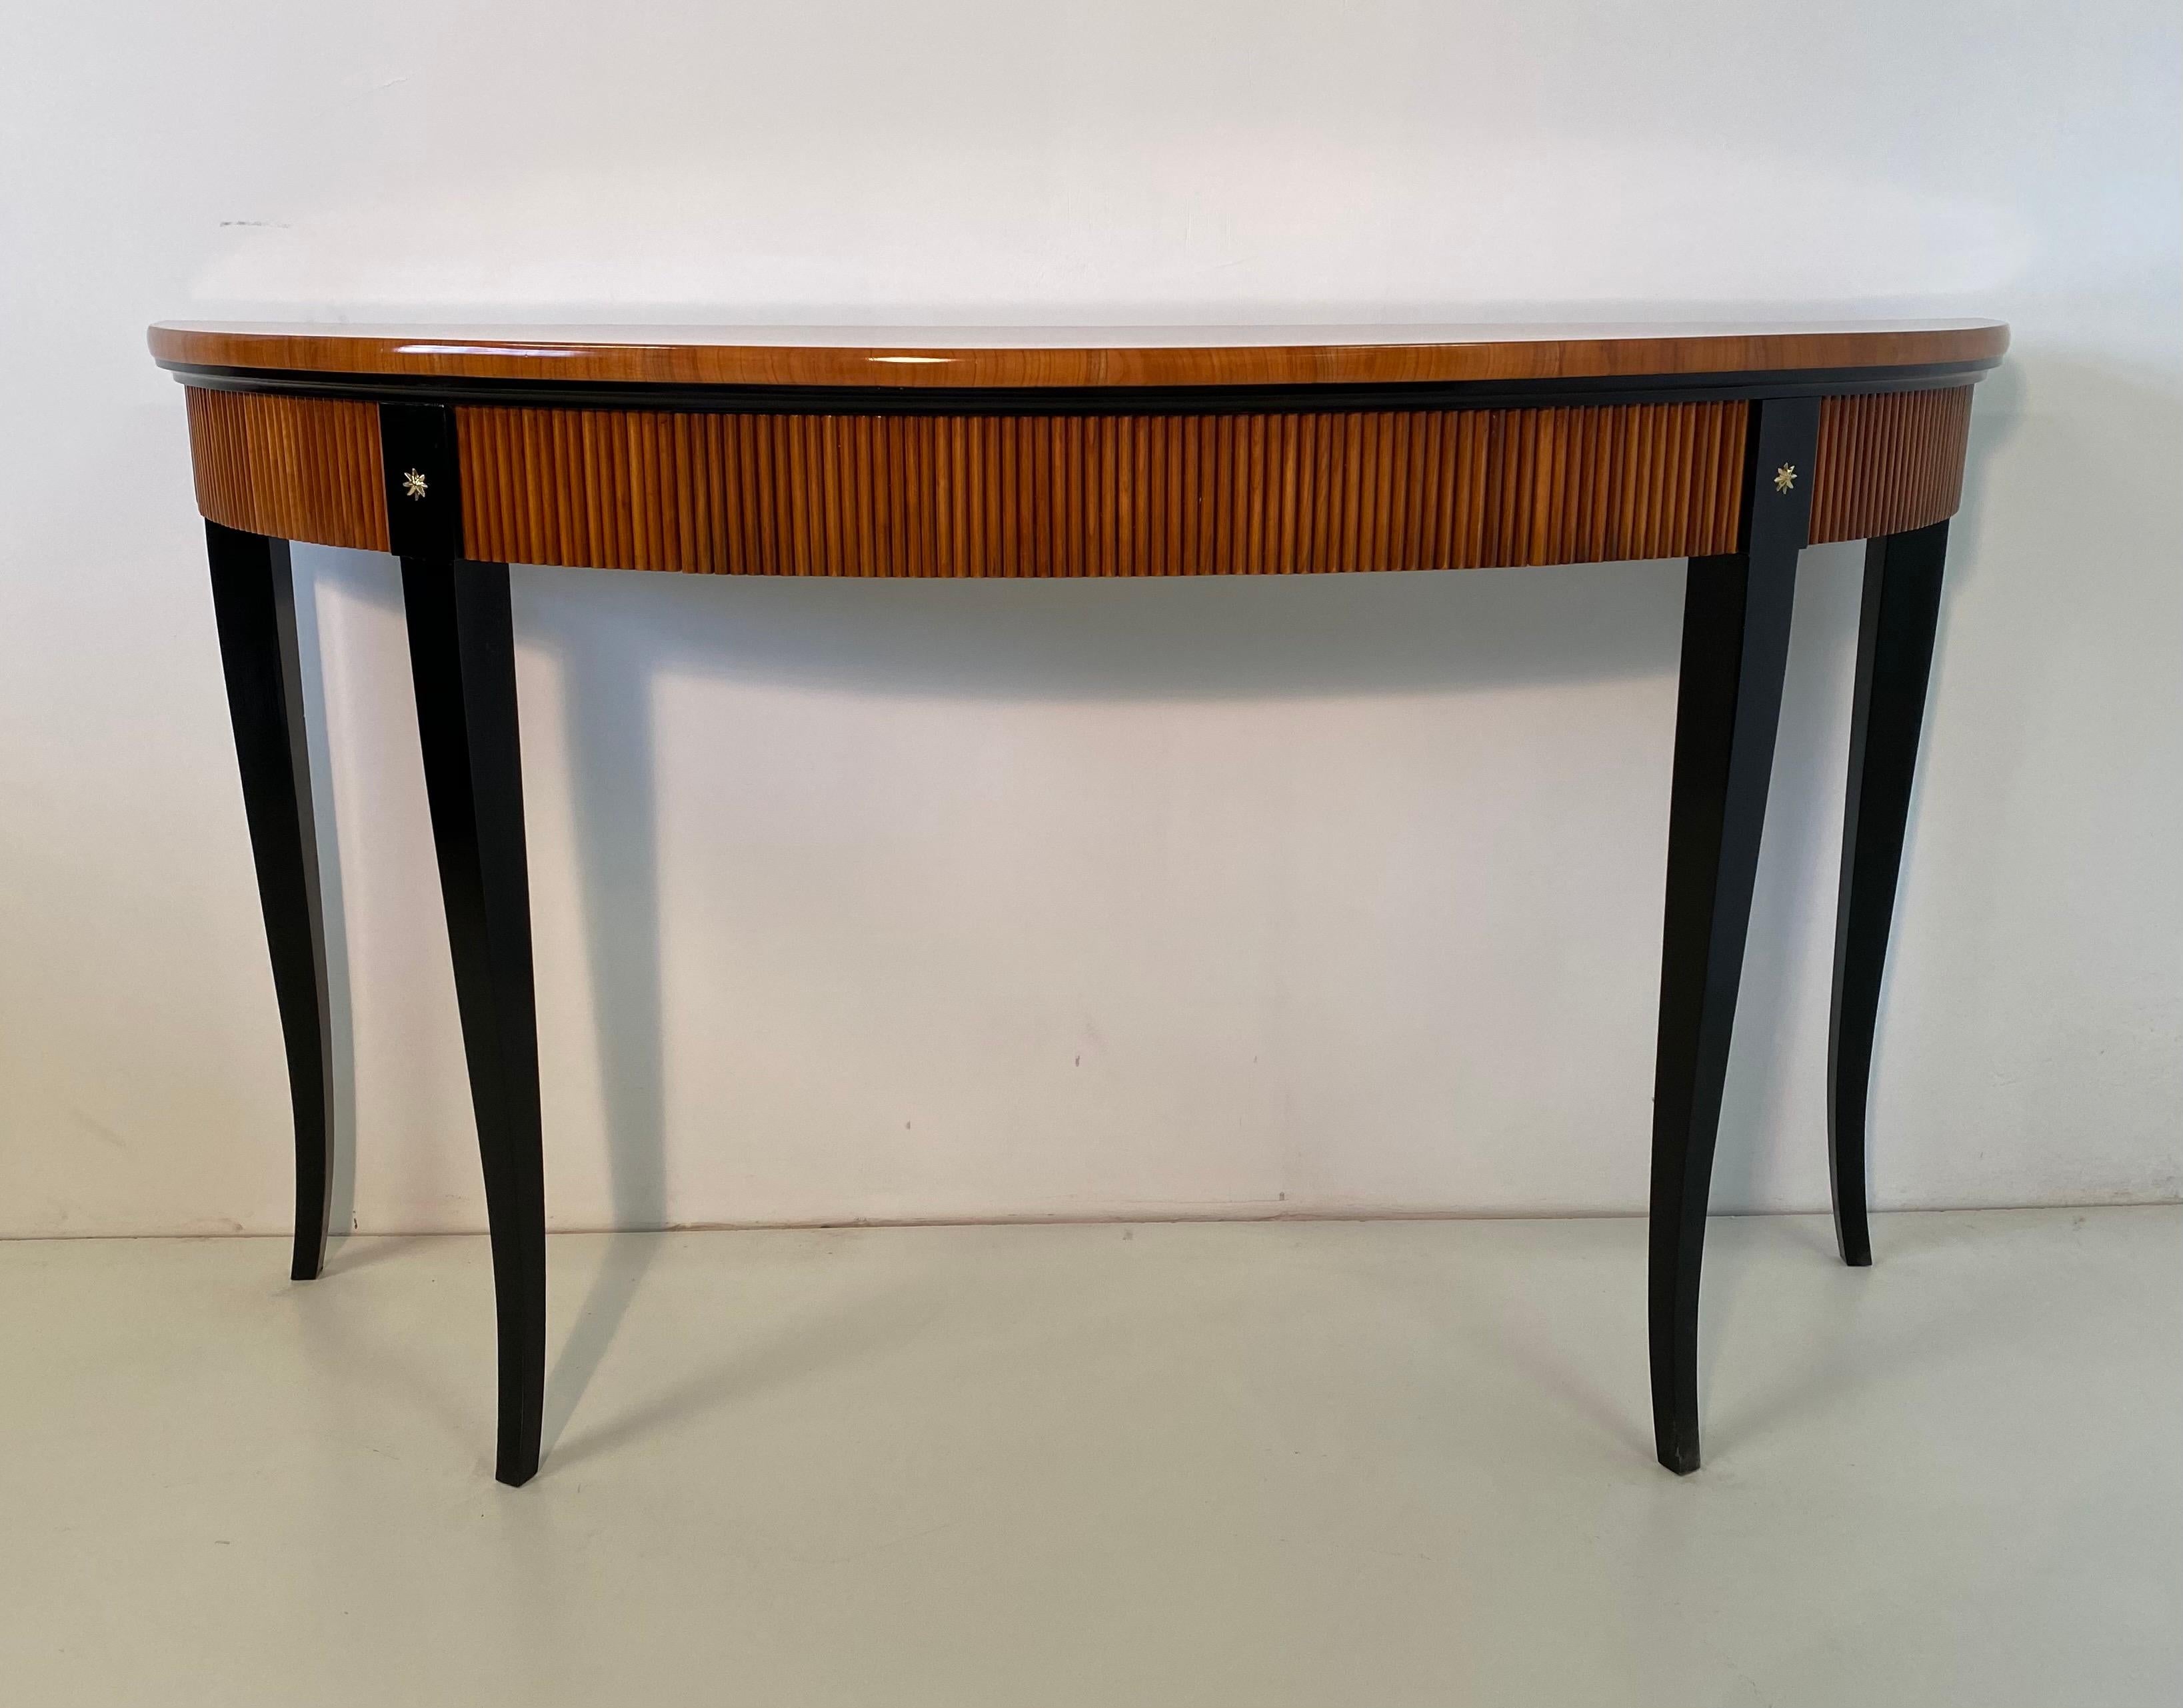 Elegant Art Deco console from the 1950s produced in Italy entirely in cherrywood with black lacquer details.
It has a drawer and it is embellished with two brass stars.
Totally restored.